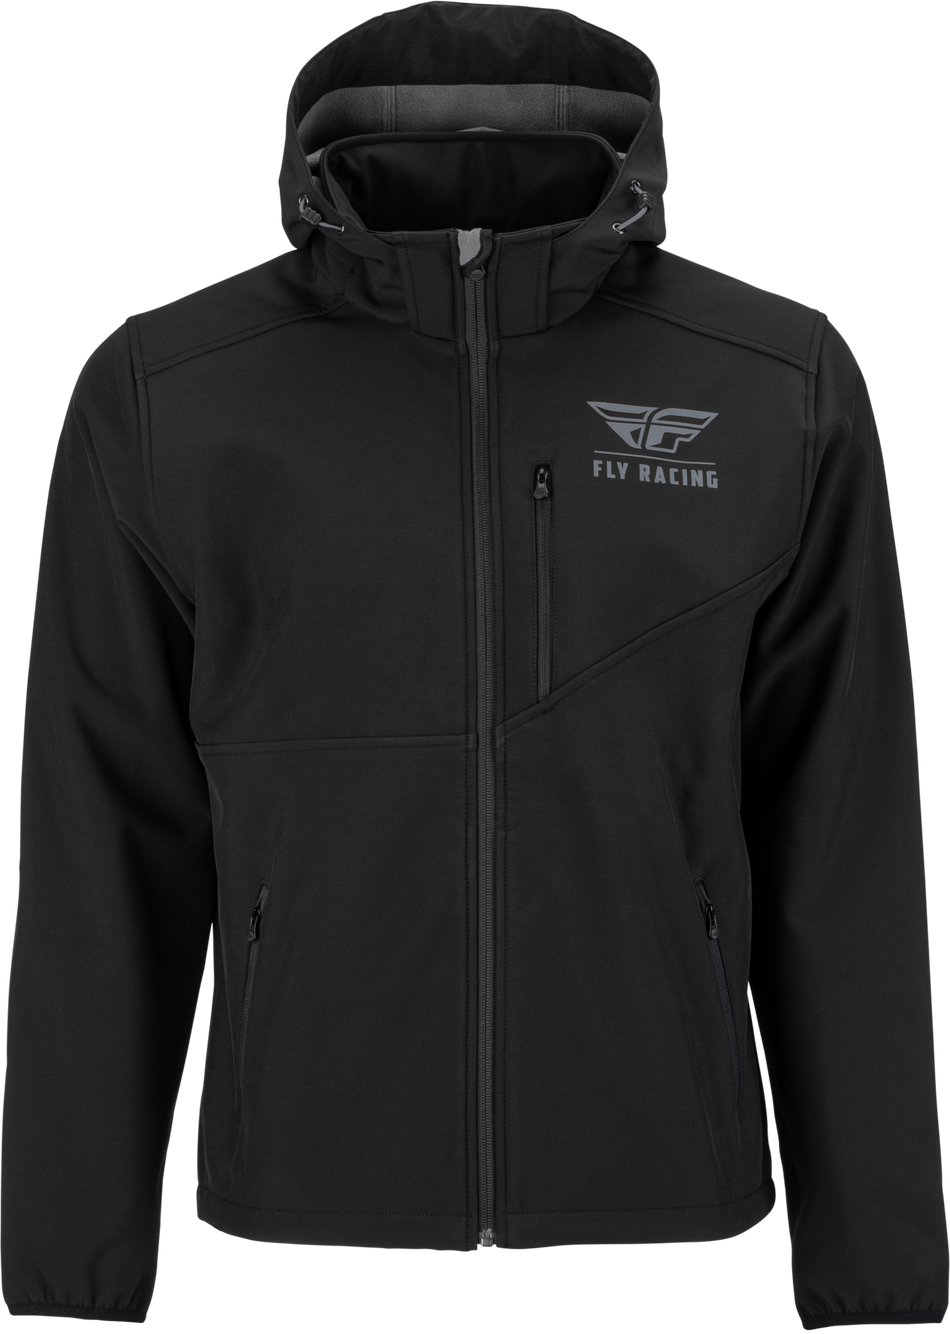 FLY RACING Checkpoint Jacket Black 2x 354-63832X